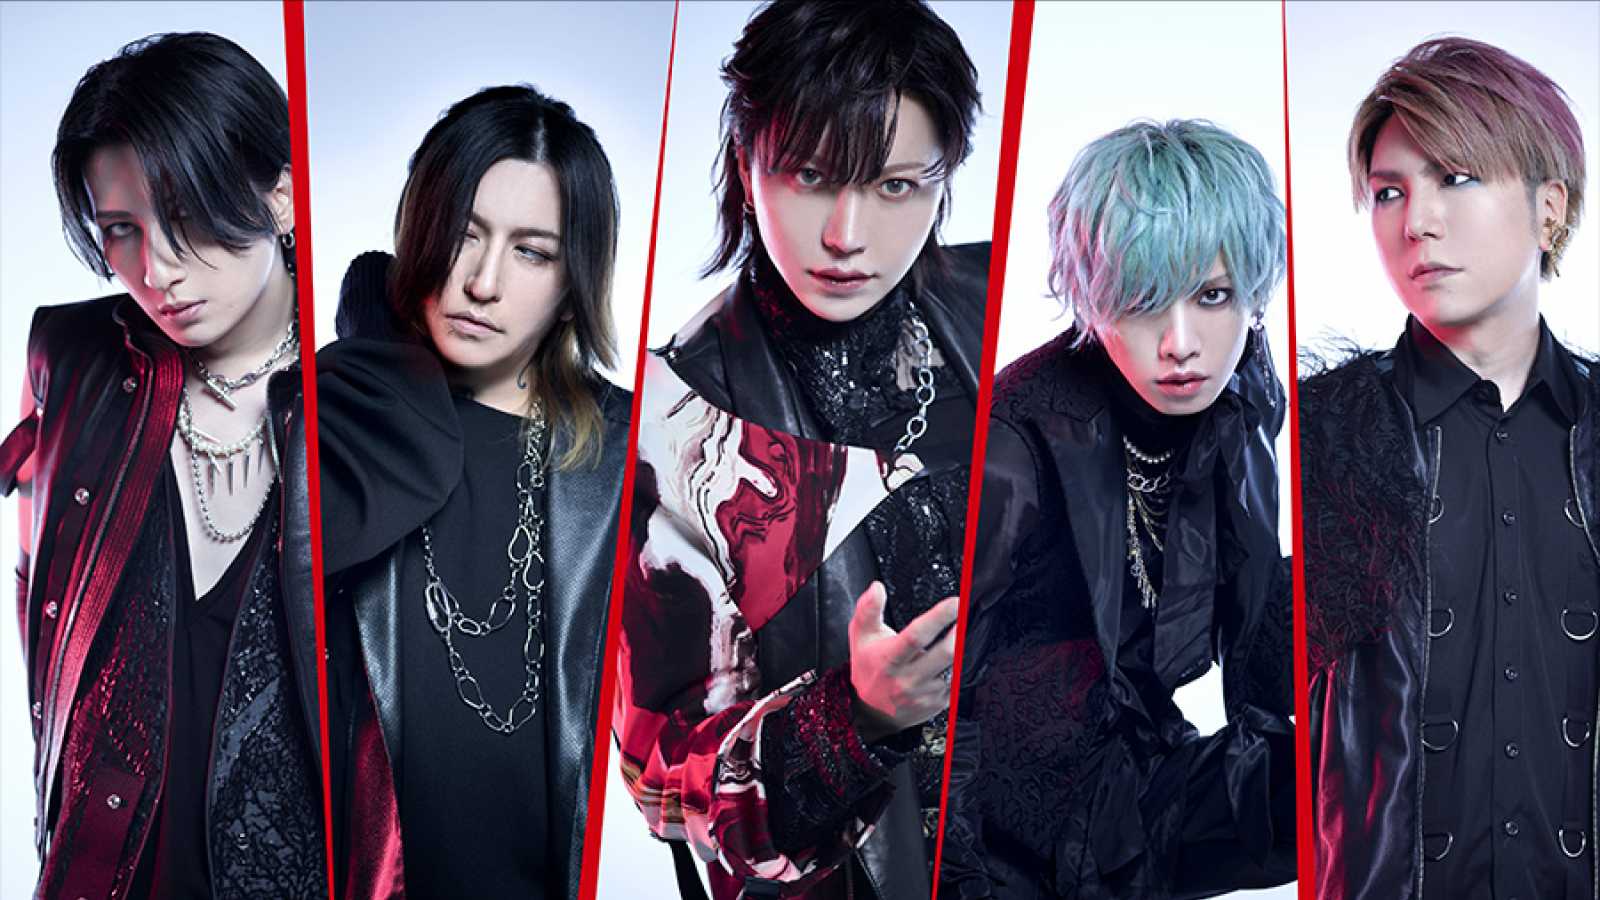 New EP from ALICE NINE. © ALICE NINE. All rights reserved.